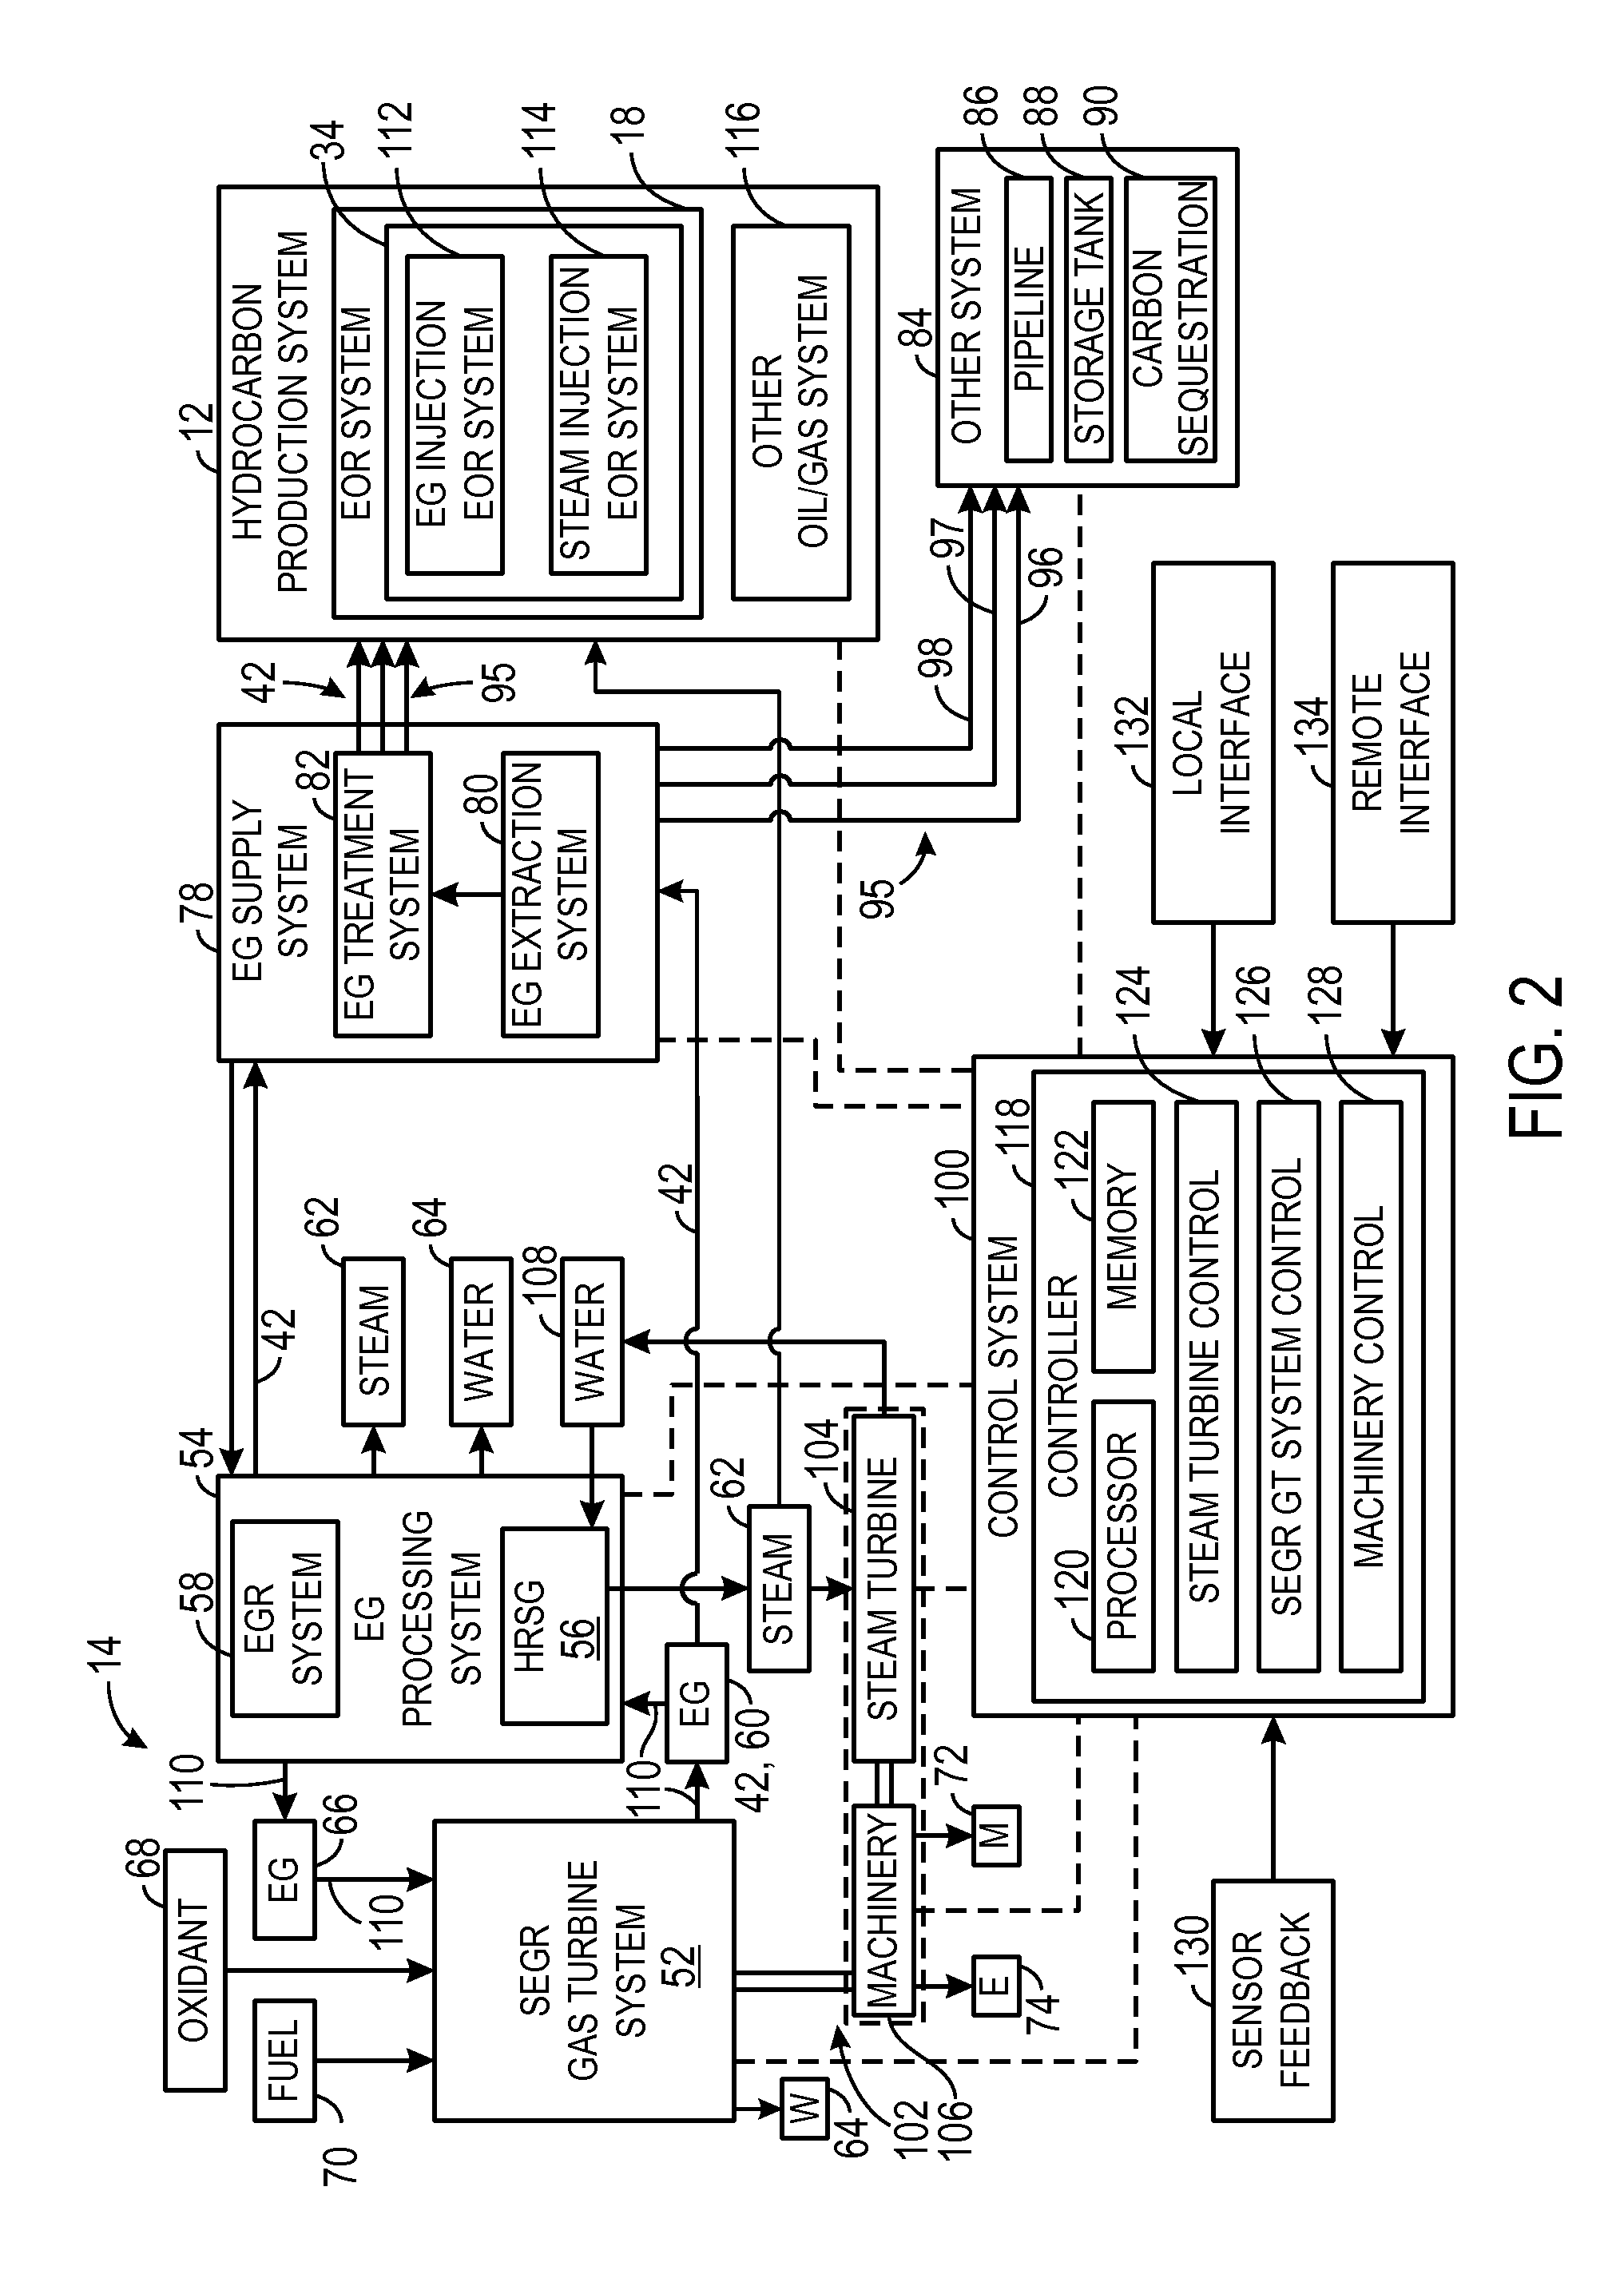 System and method for load control with diffusion combustion in a stoichiometric exhaust gas recirculation gas turbine system